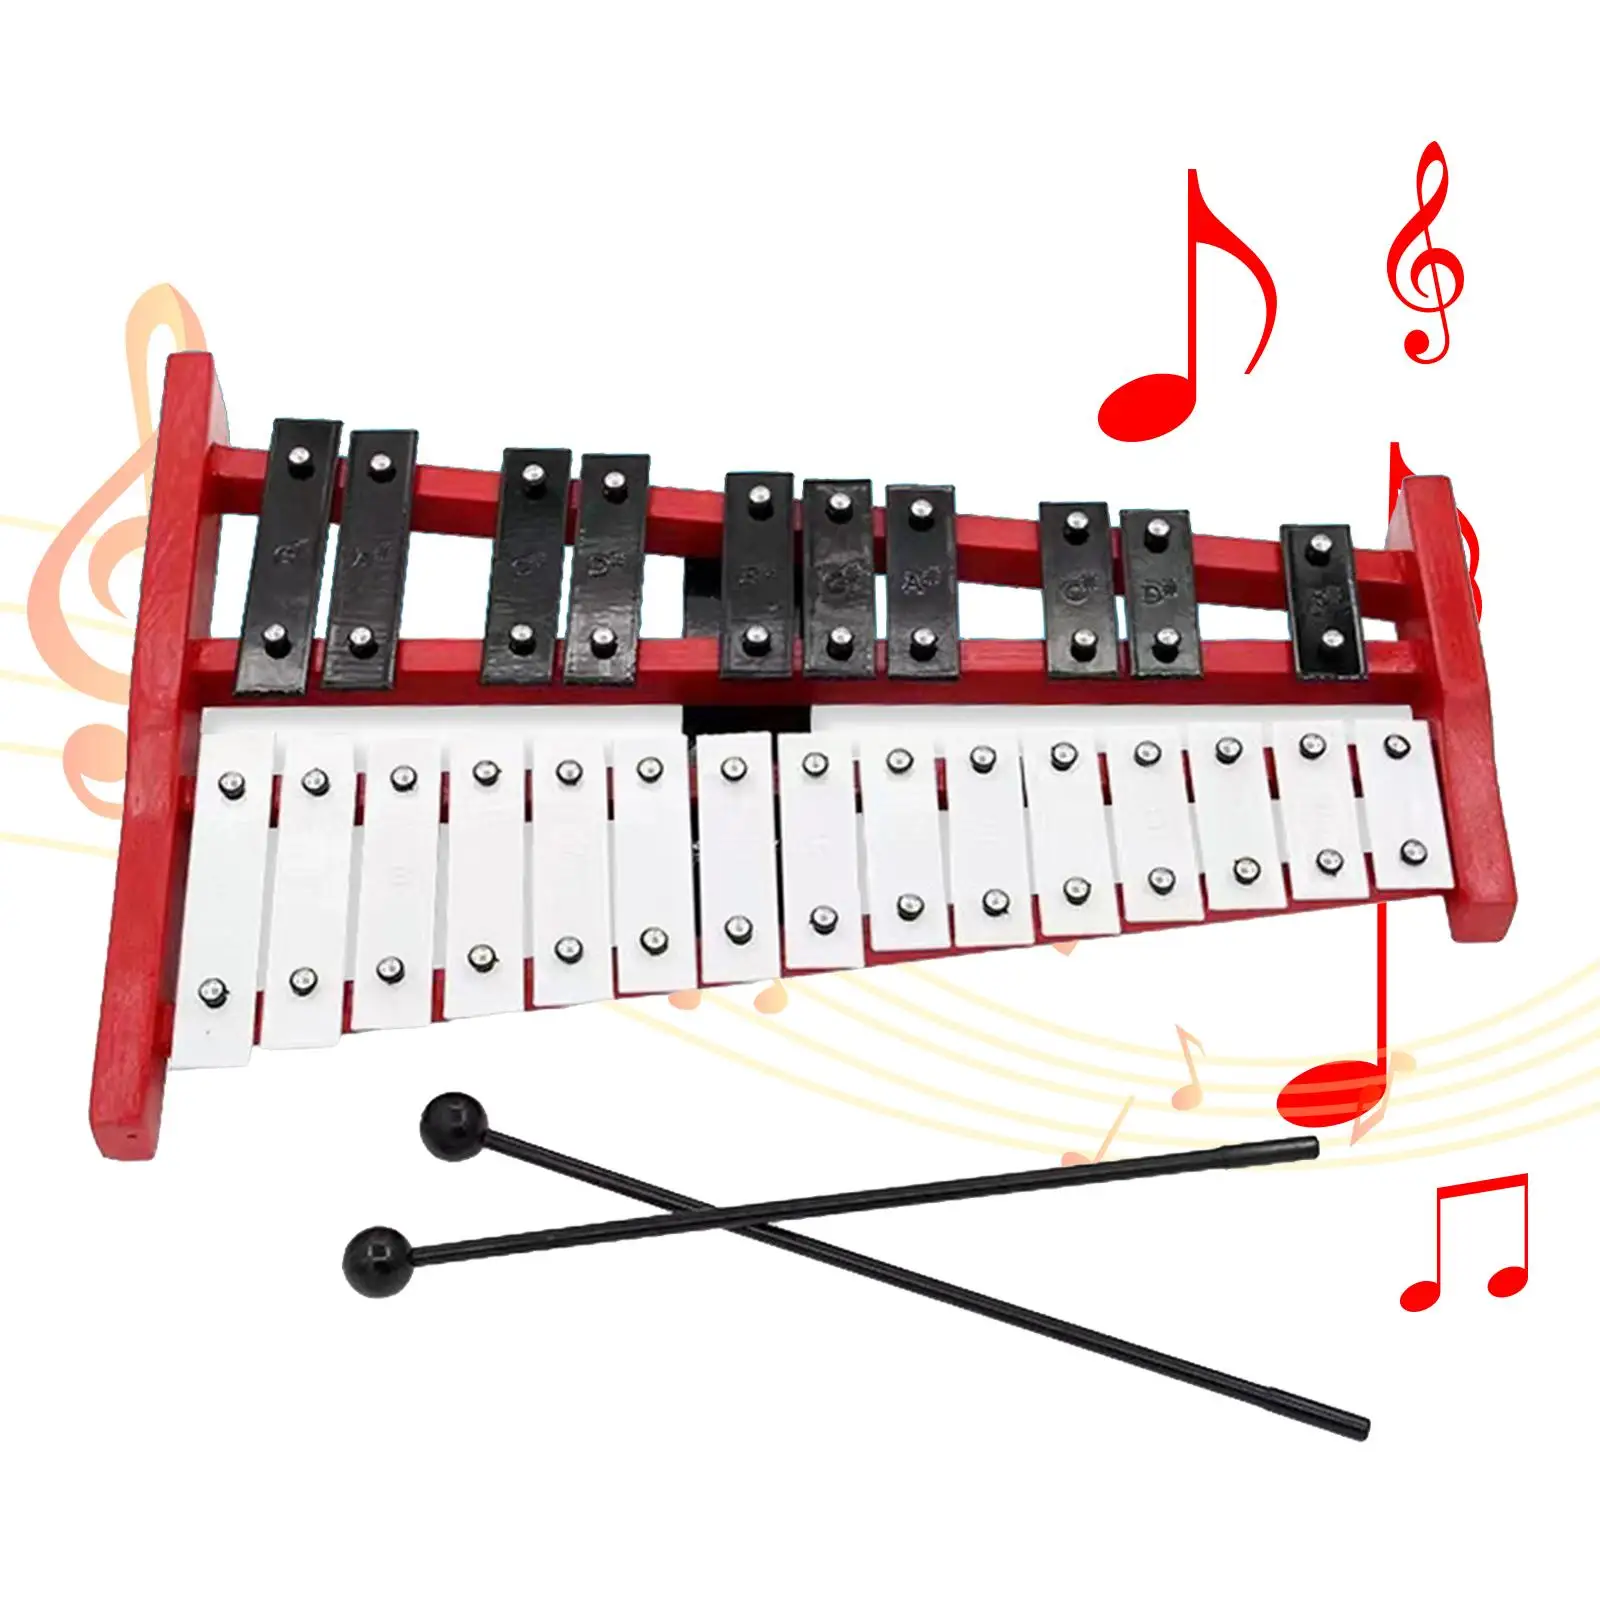 Glockenspiel Xylophone Kids Music Motor Skill Wooden Percussion Toys 25 Note for School Orchestras Live Performance